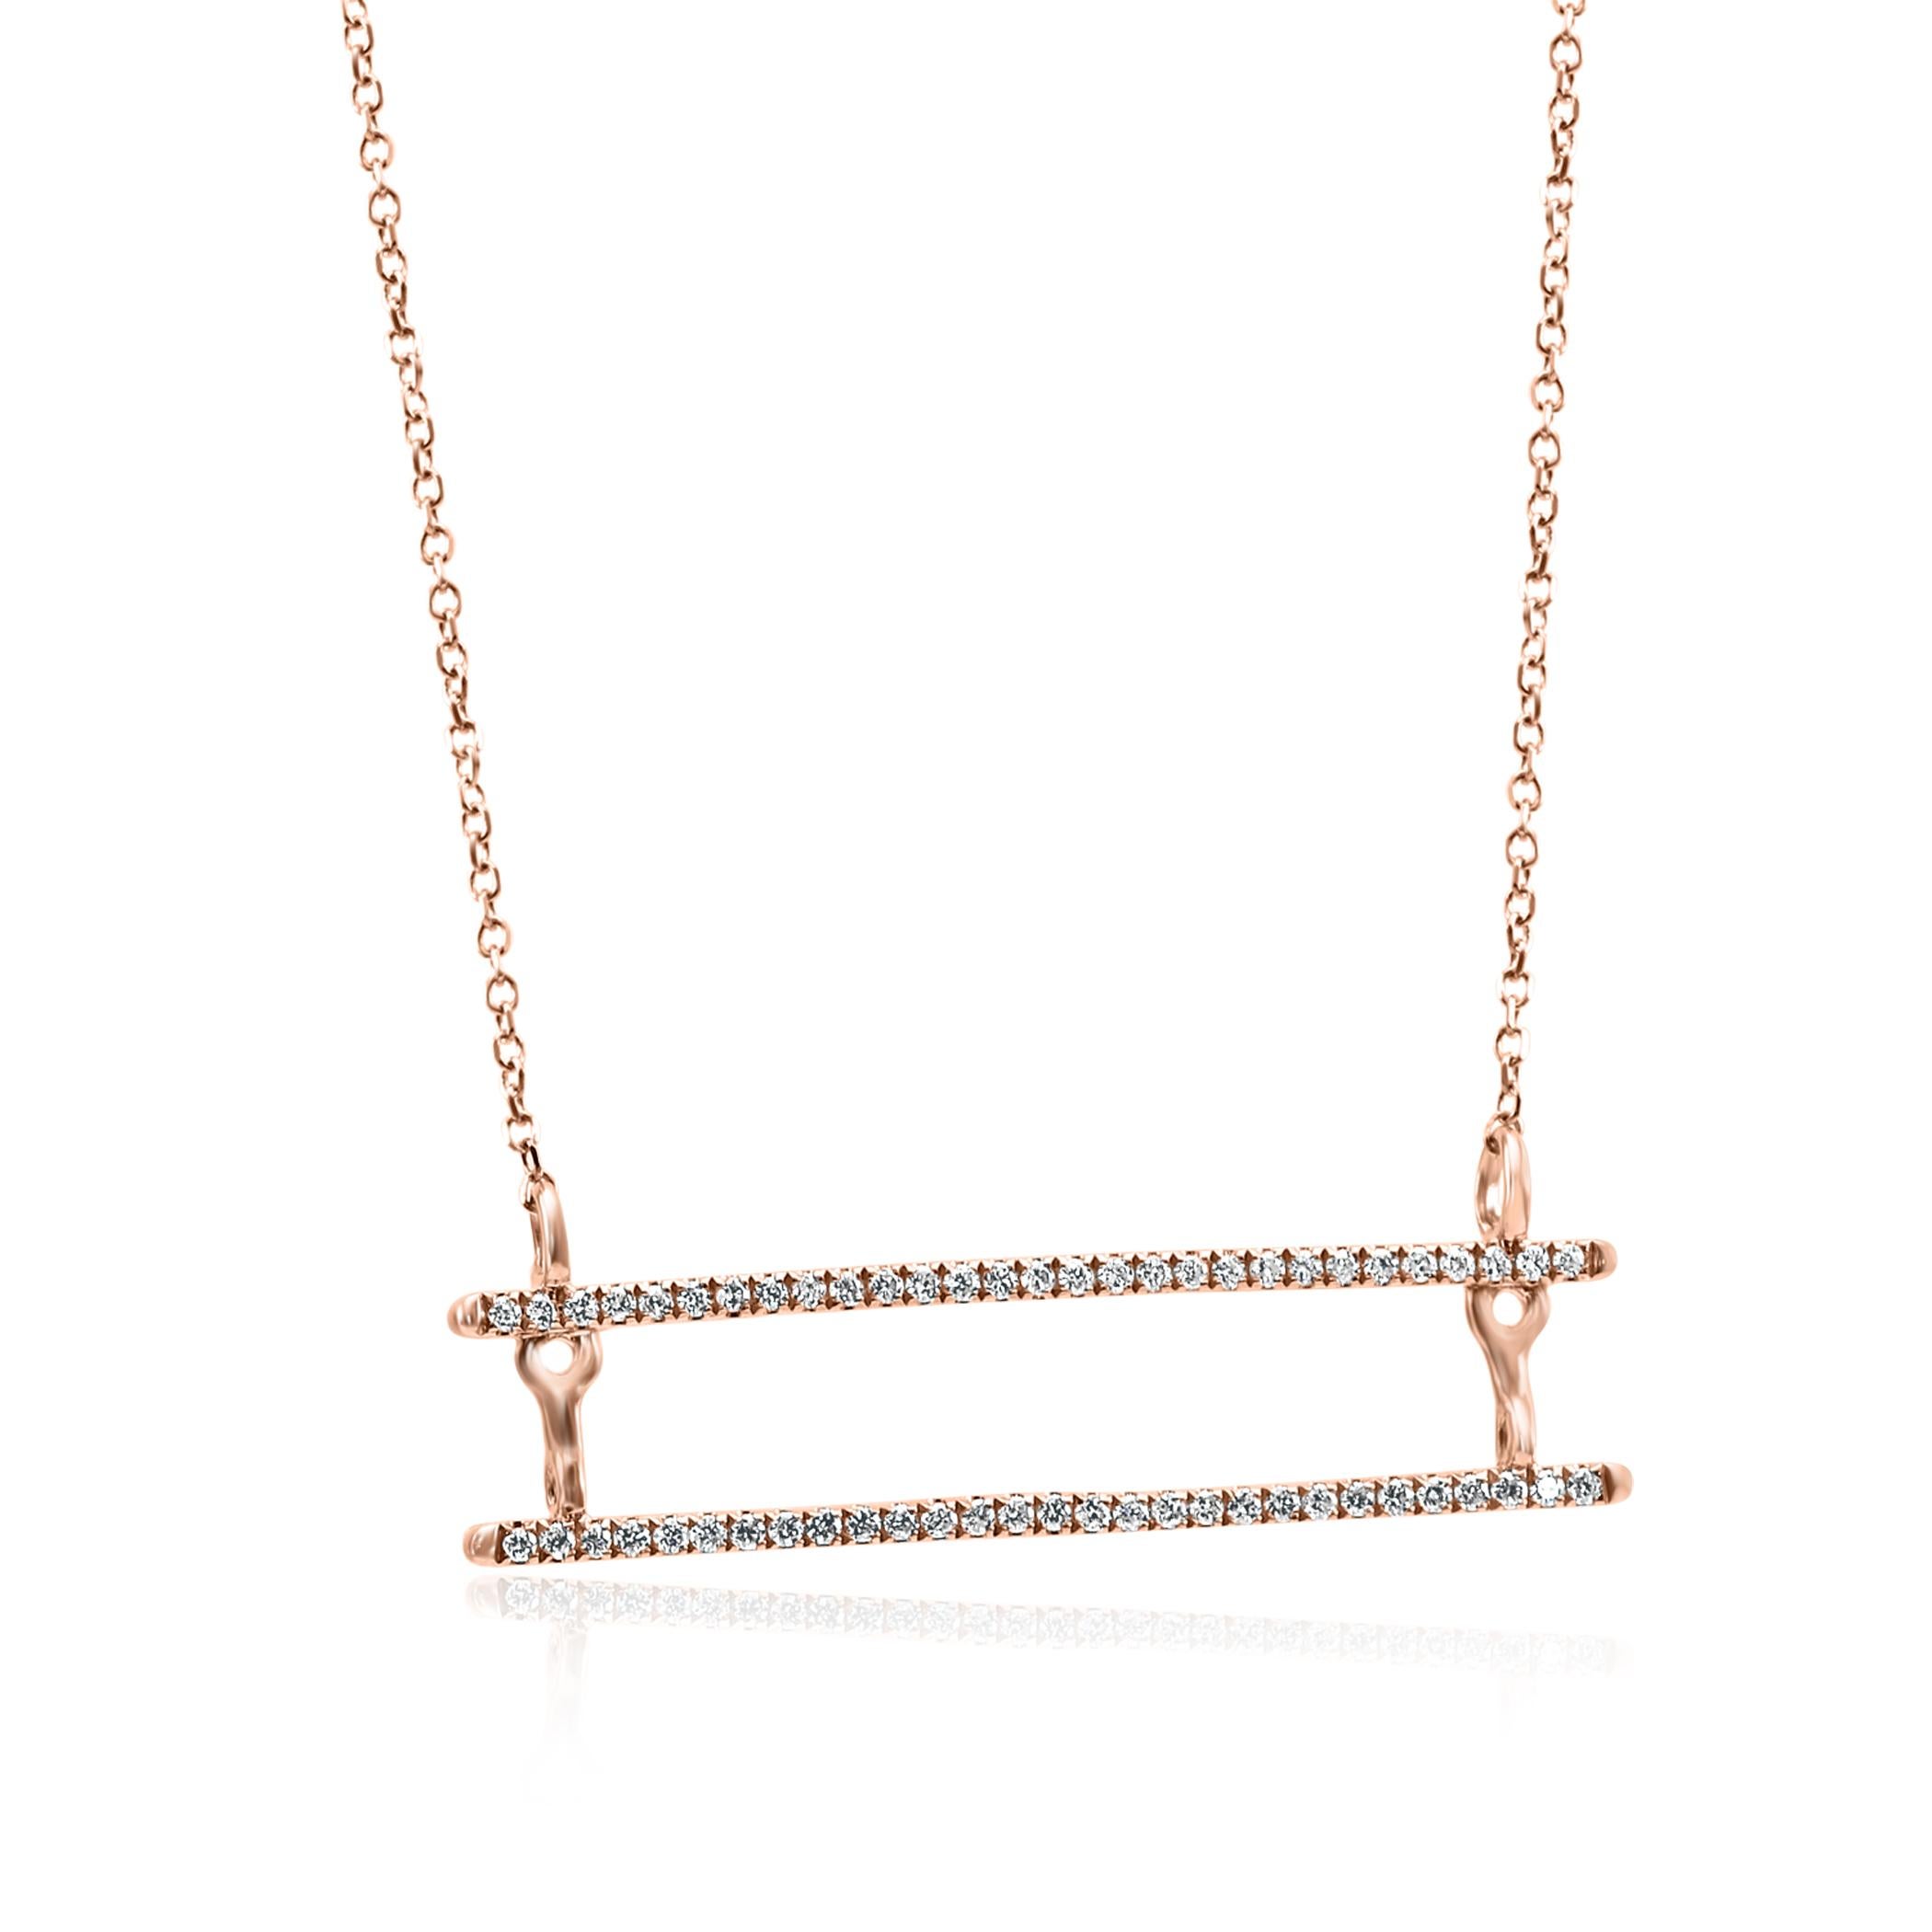 58 White G-H Color Si Clarity Diamond Rounds 0.25 Carat set in Chic Diamond Double Bar style 14K Rose Gold Fashion Drop Chain Necklace. Prefect for every day wear elegant and stylish. 

Total Diamond Weight 0.25 Carat